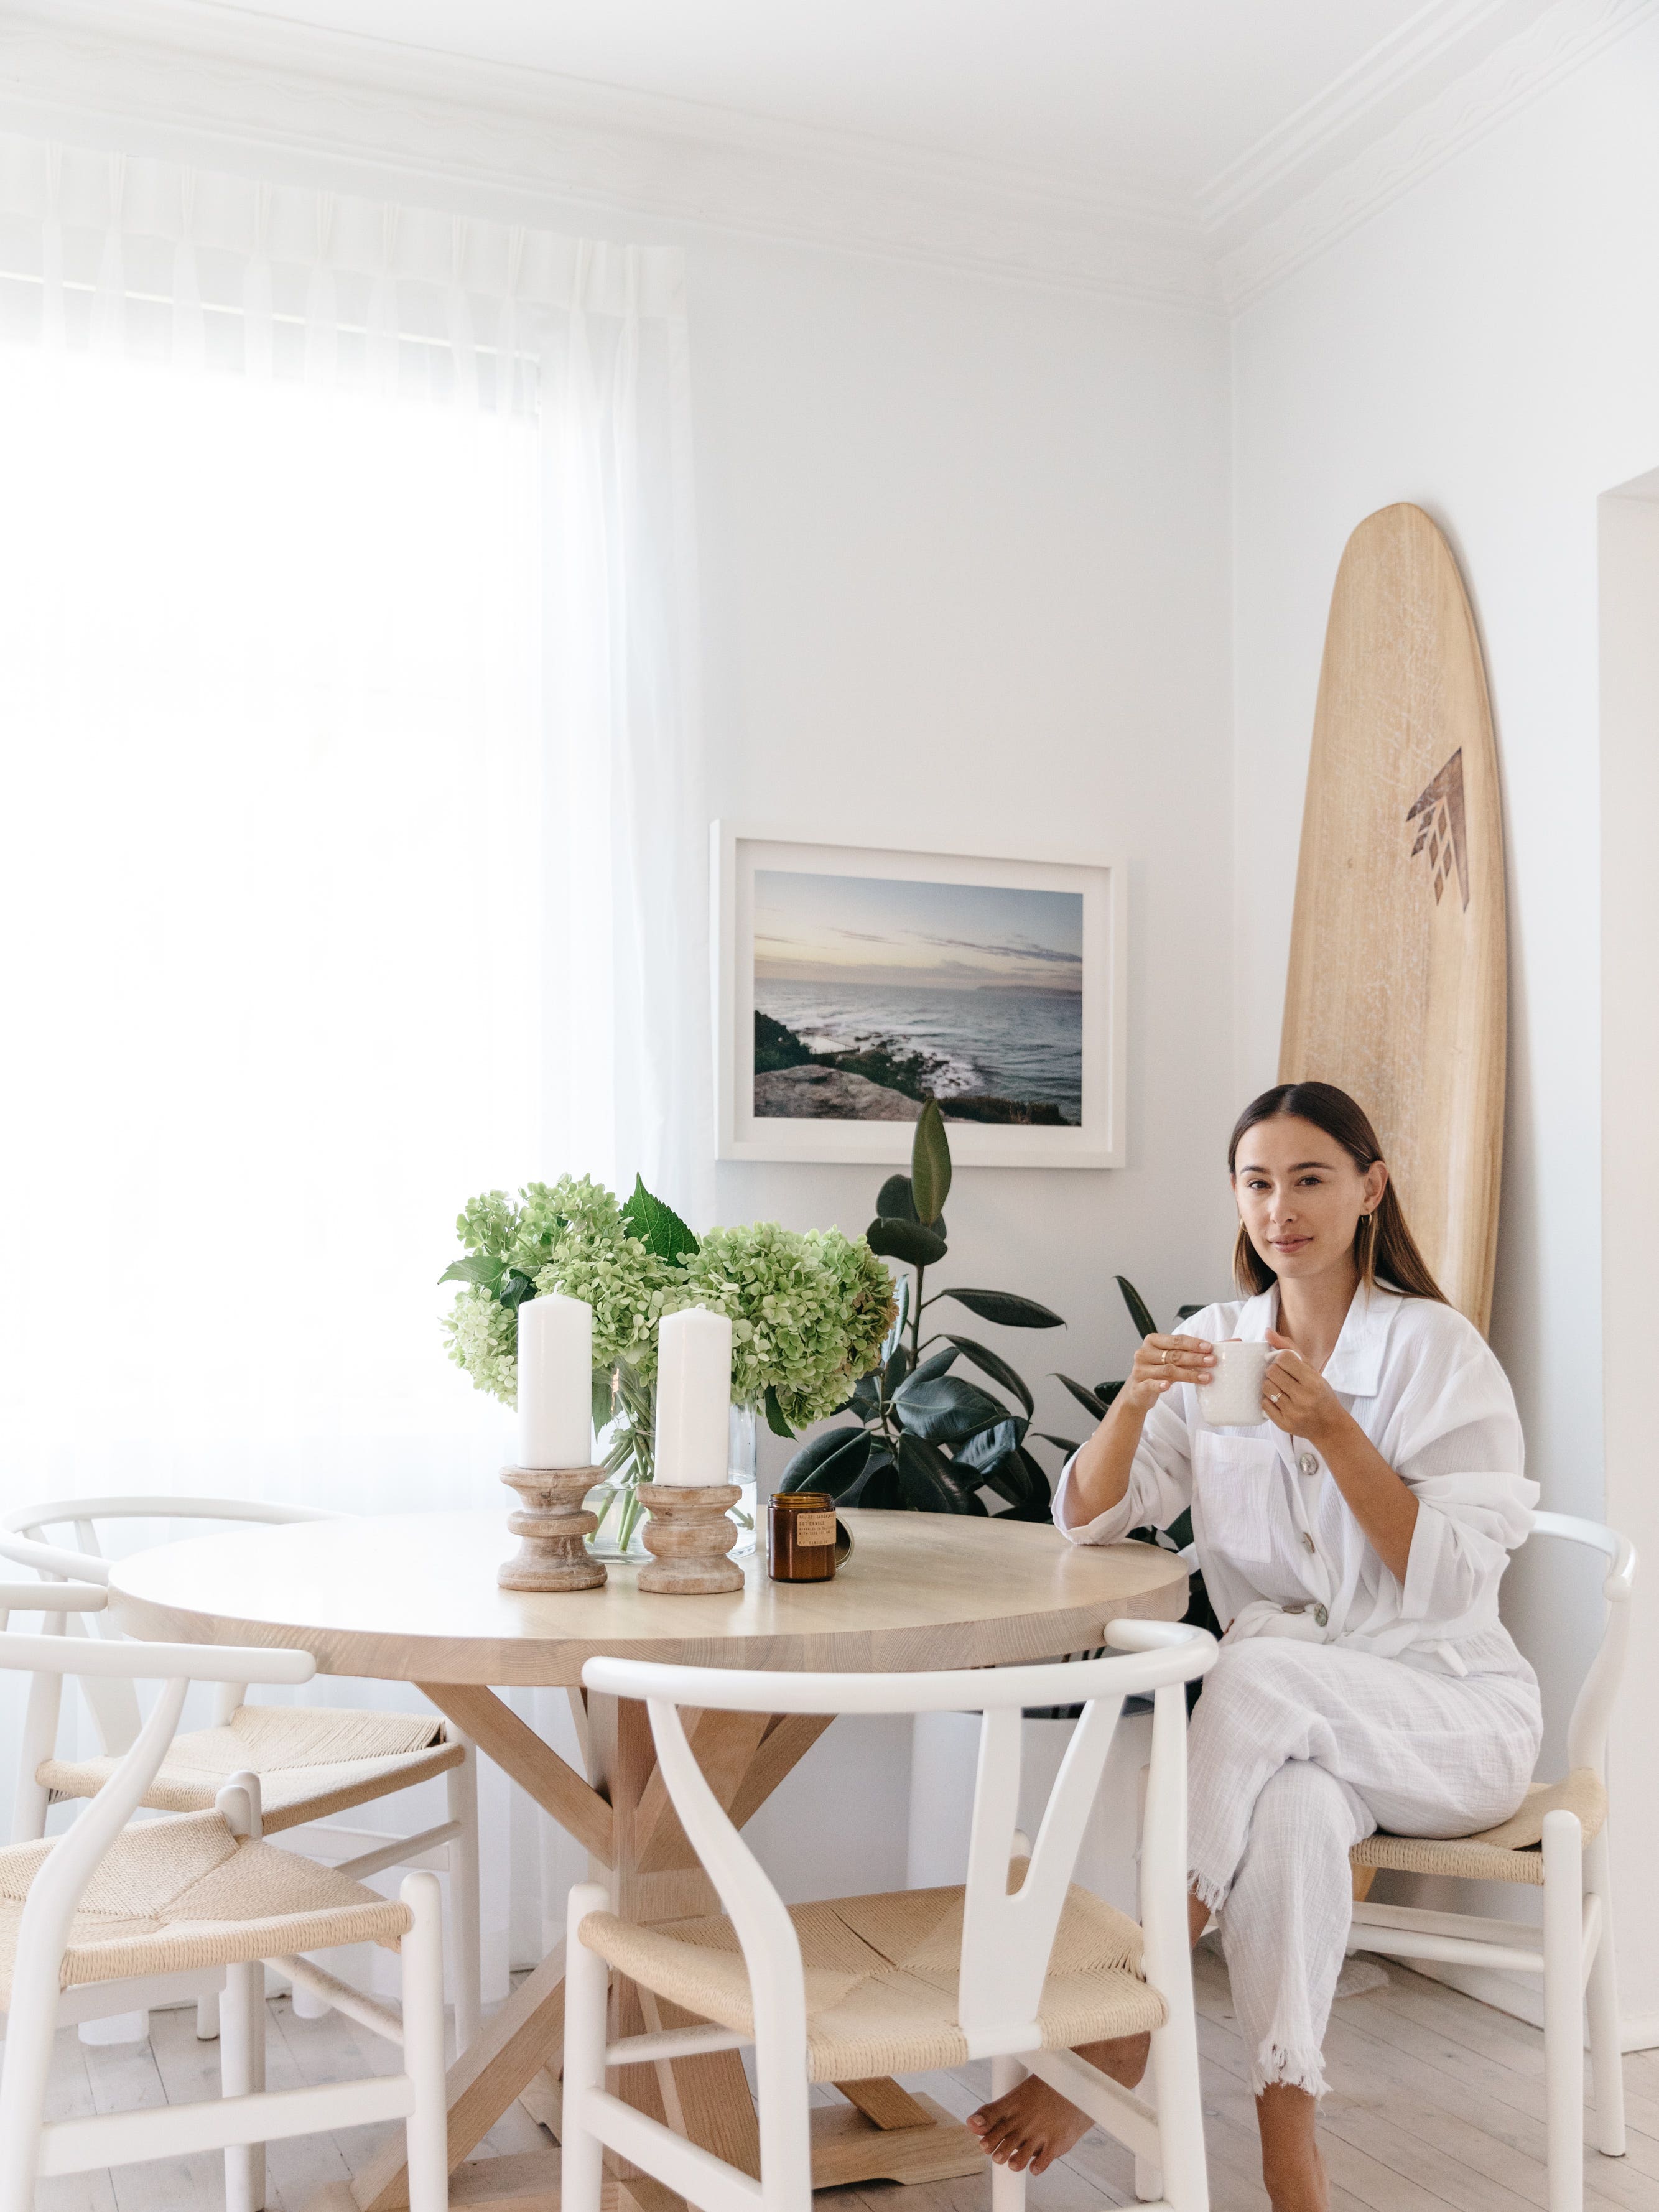 This Australian Beauty Editor’s Home Is How You Do Minimalism Right